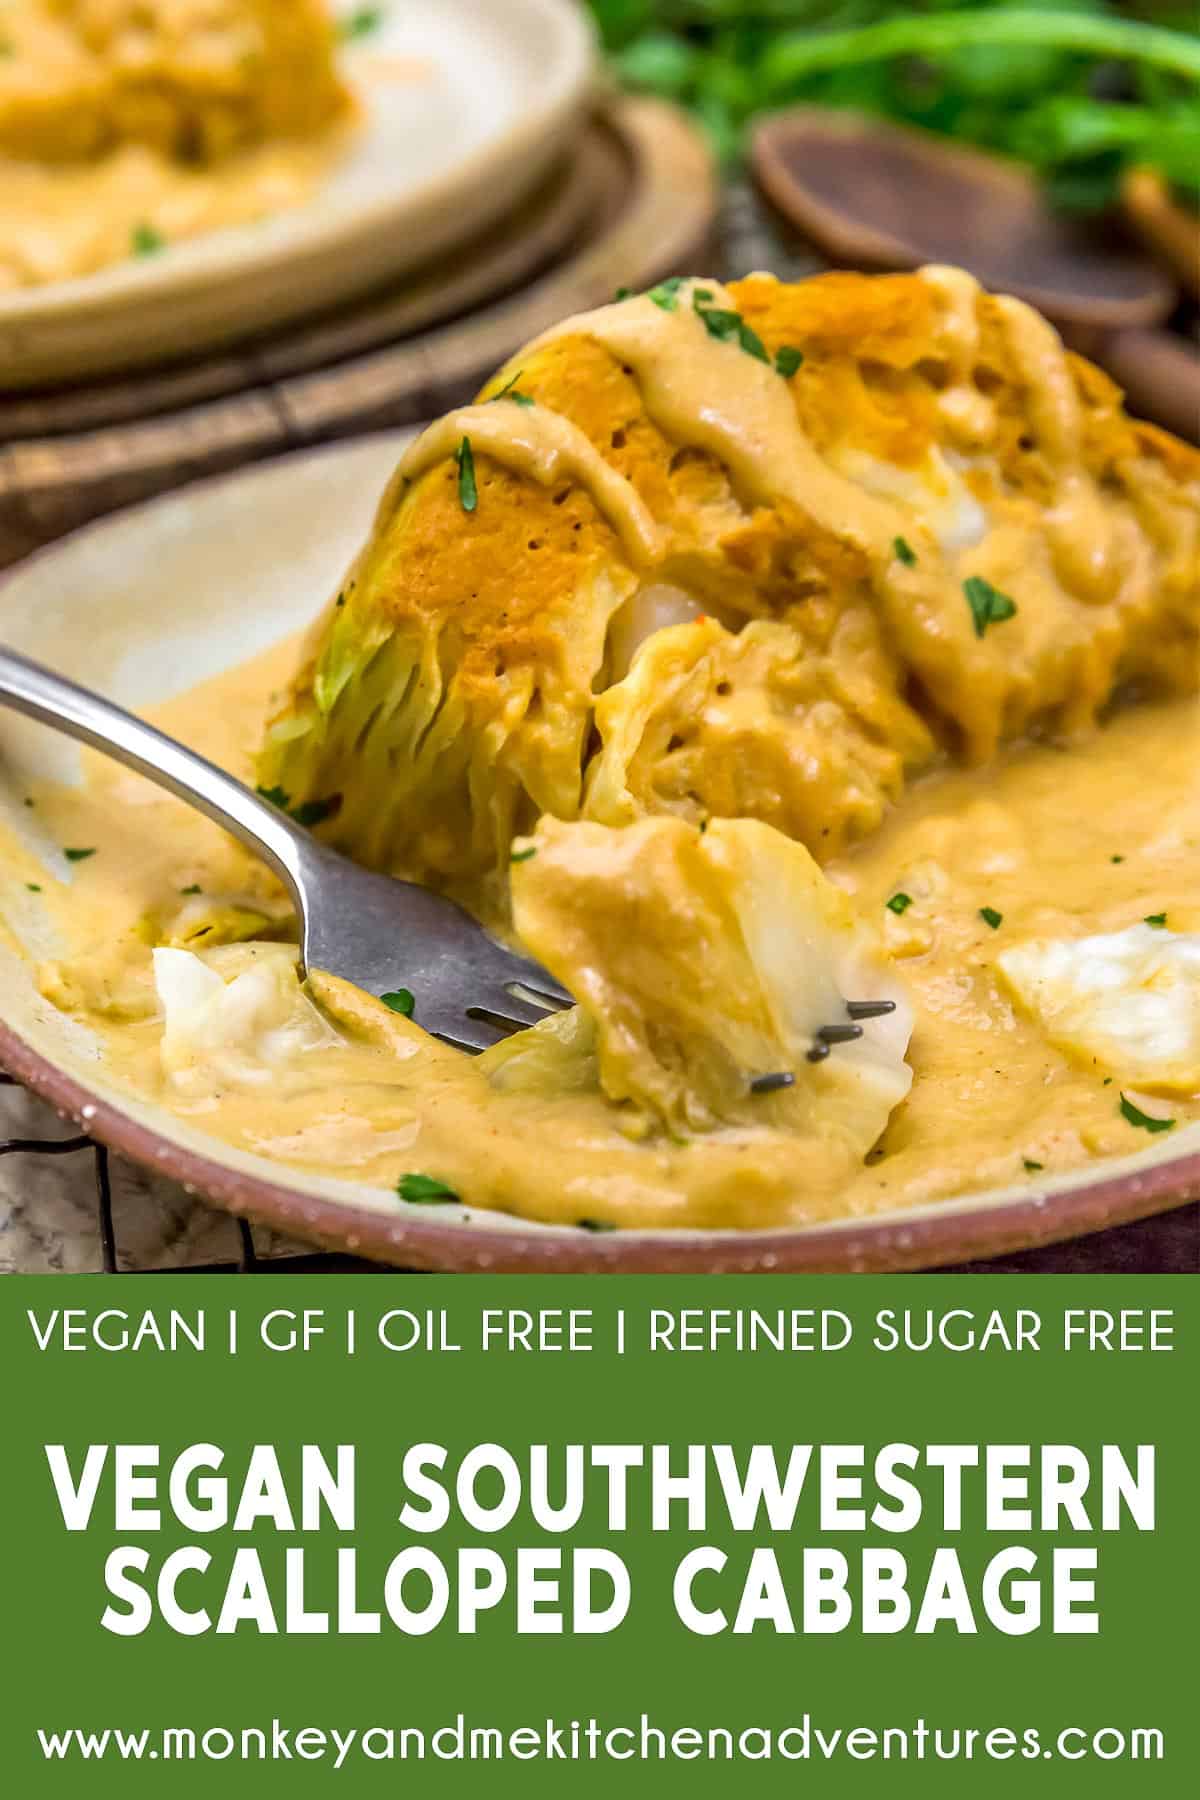 Vegan Southwestern Scalloped Cabbage with text description